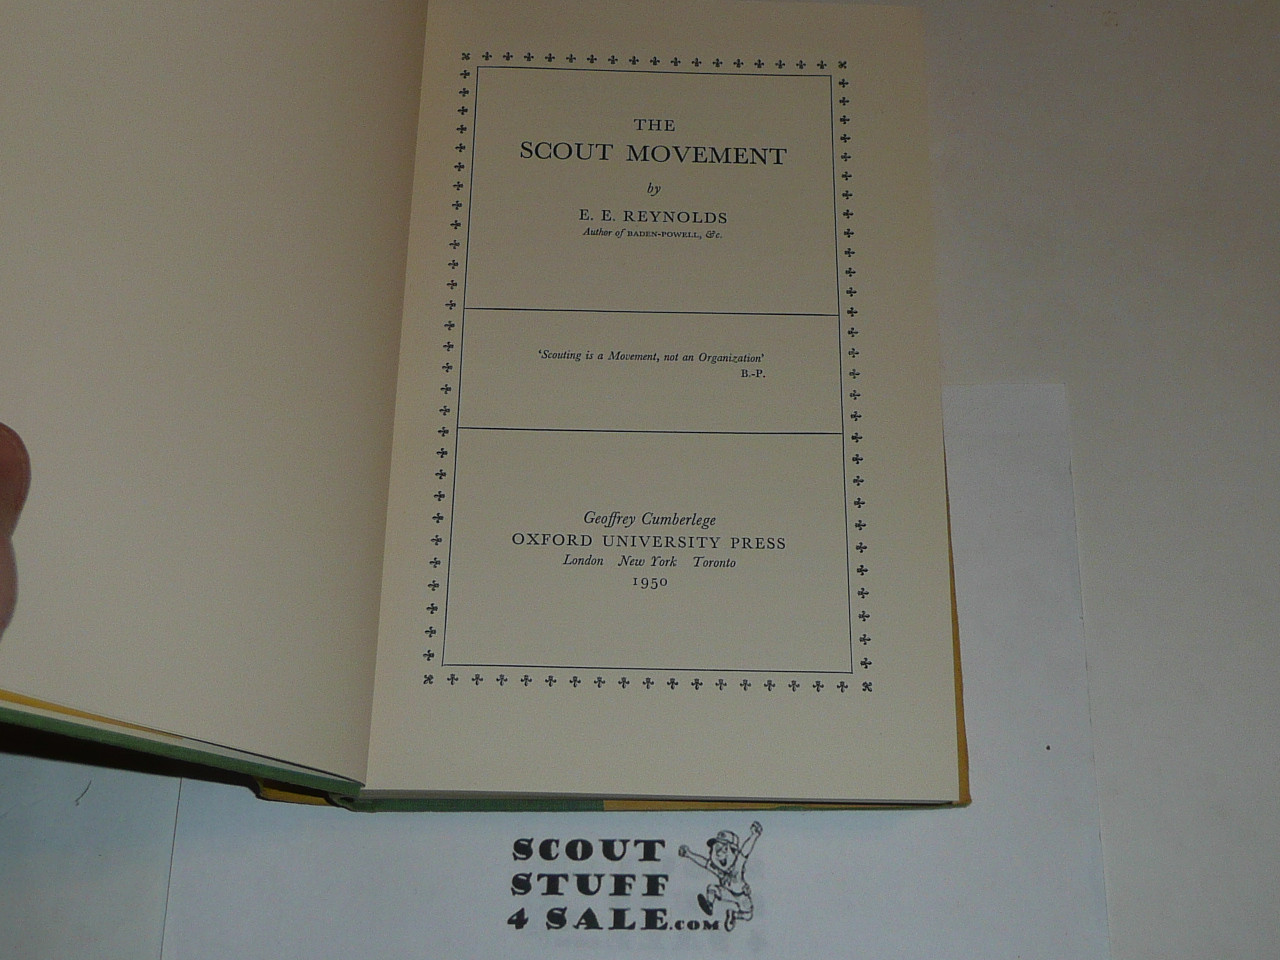 The Scout Movement, By E.E. Reynolds, 1950 printing, with dust jacket